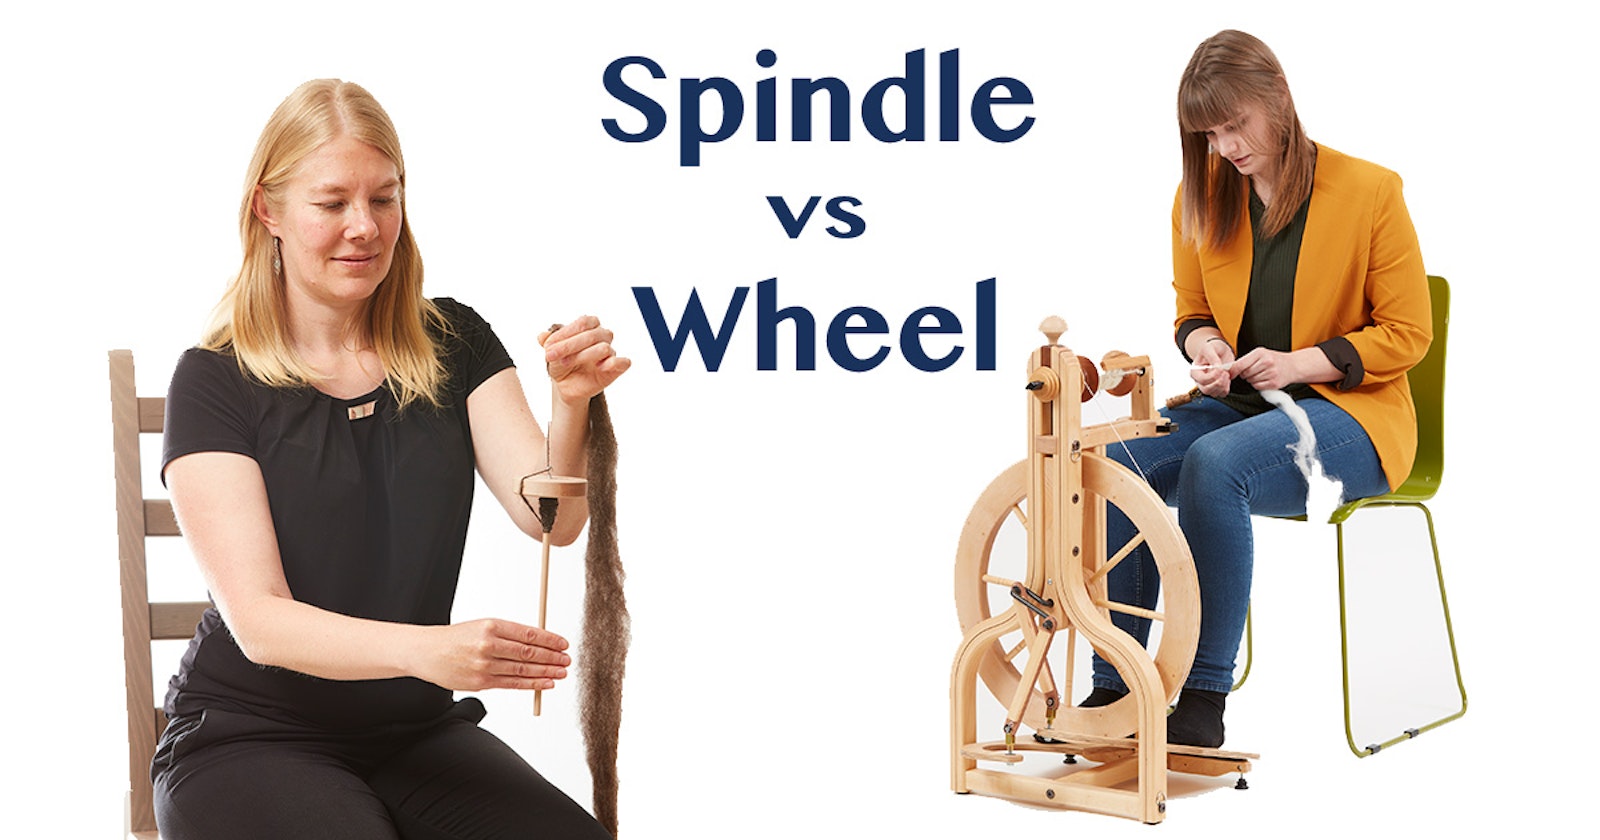 Learning How to Spin Yarn: Spindle vs Wheel